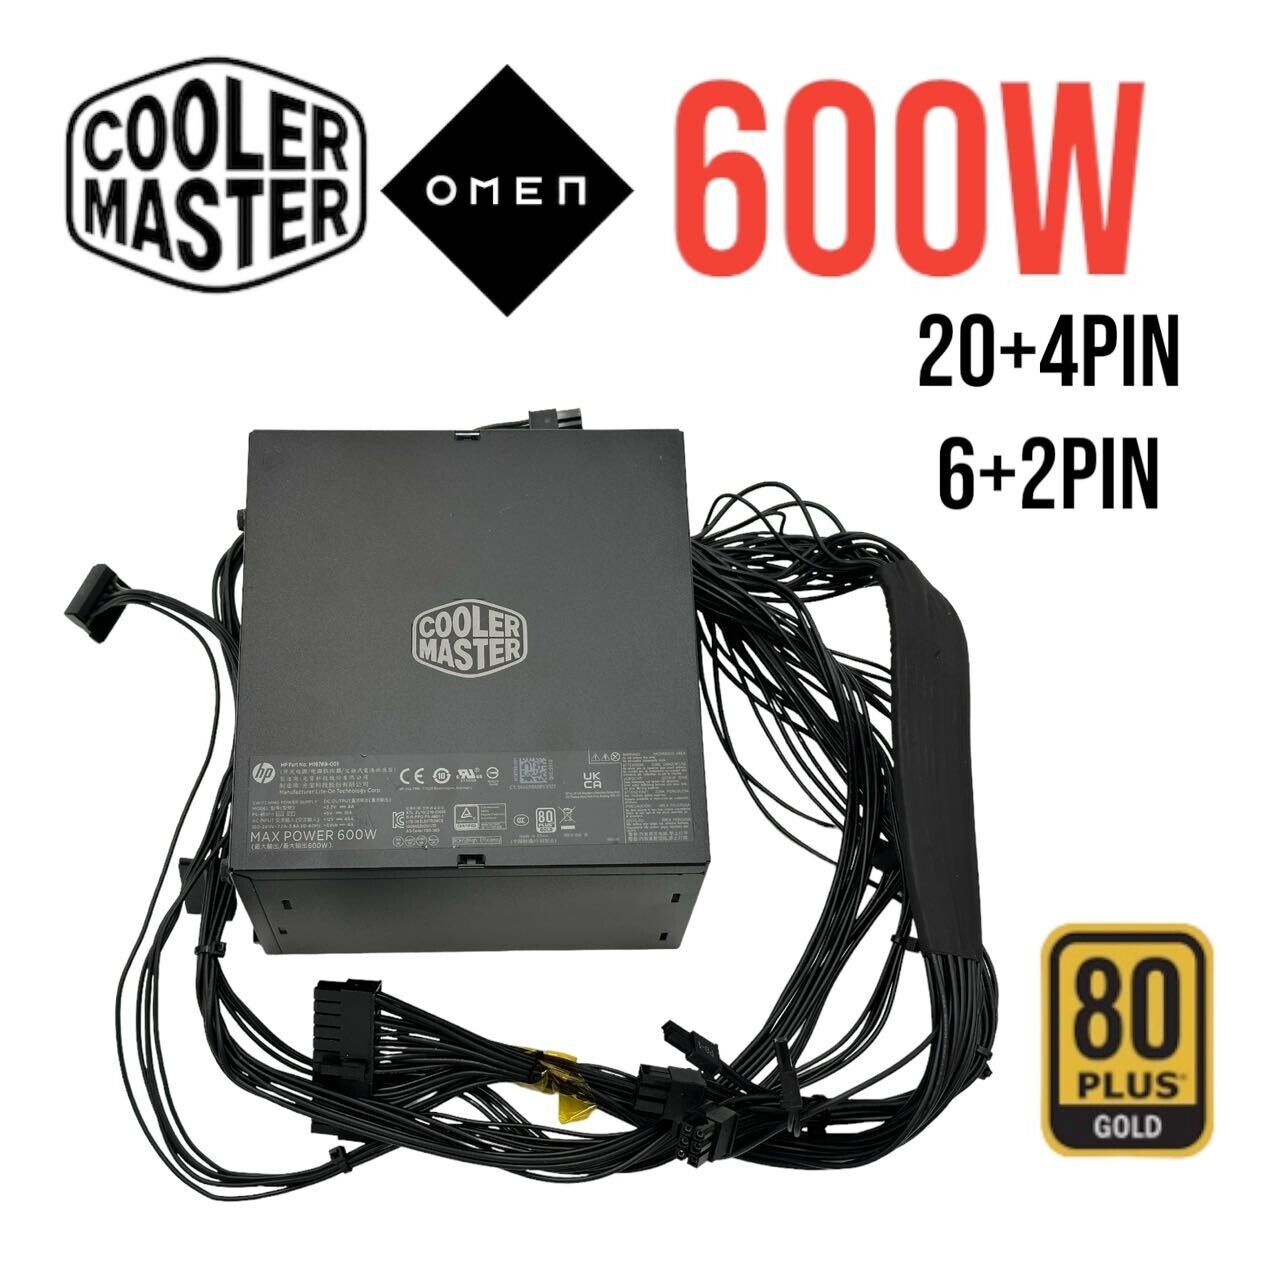 NEW Cooler Master 600W Computer Power Supply 80Plus Gold Certified ATX PSU